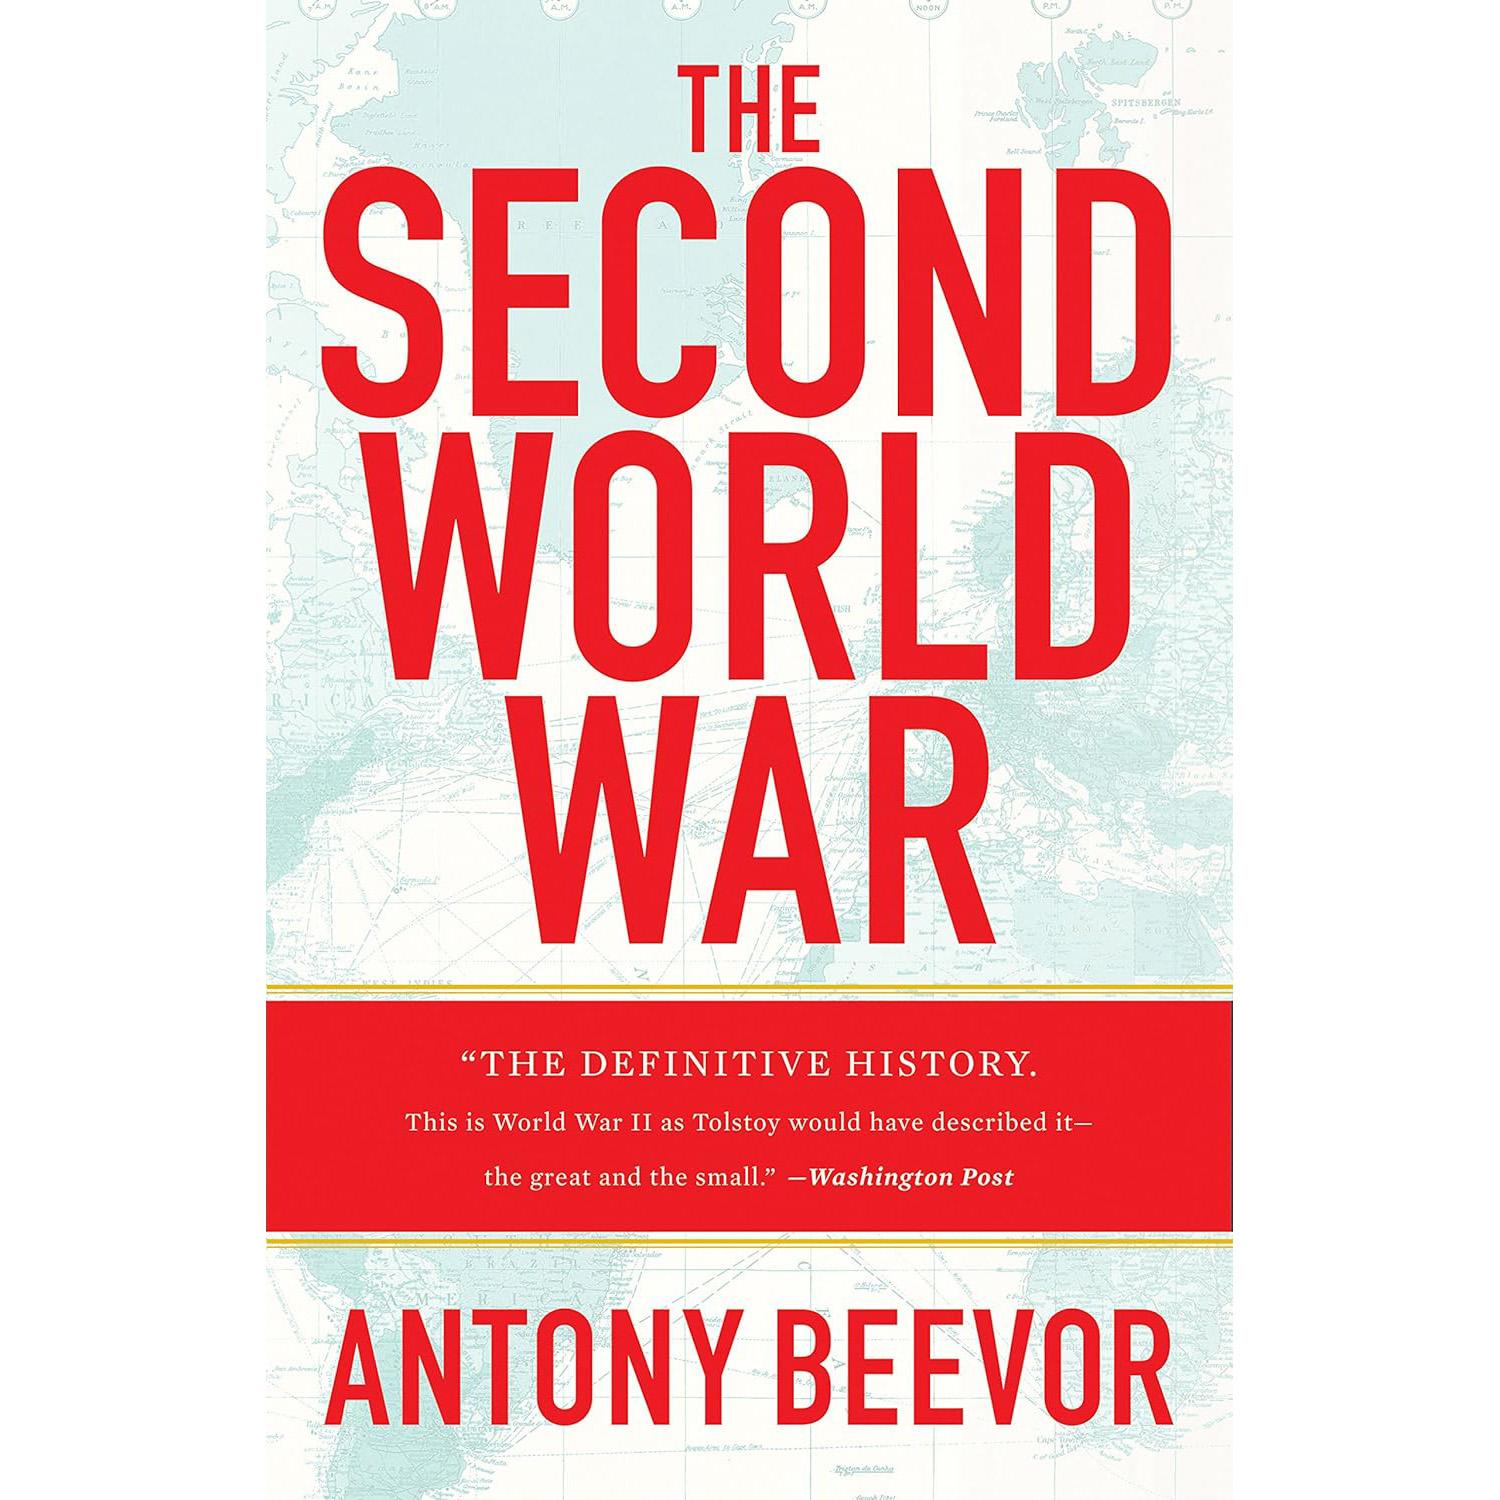 The Second World War by Antony Beevor eBook for $1.99